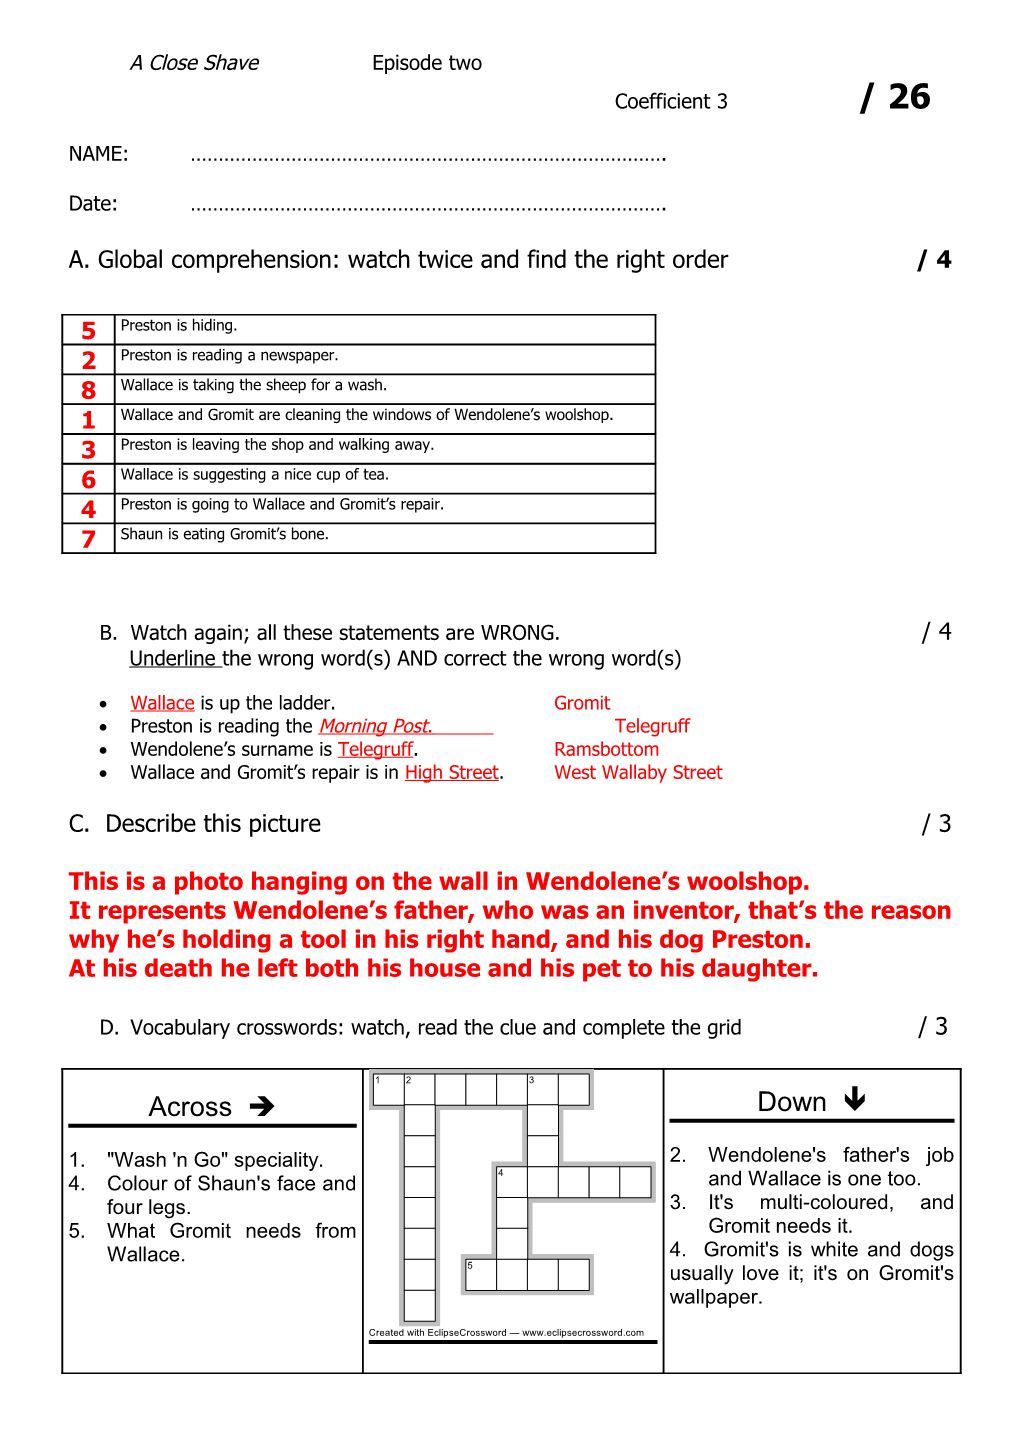 A. Global Comprehension: Watch Twice and Find the Right Order / 4